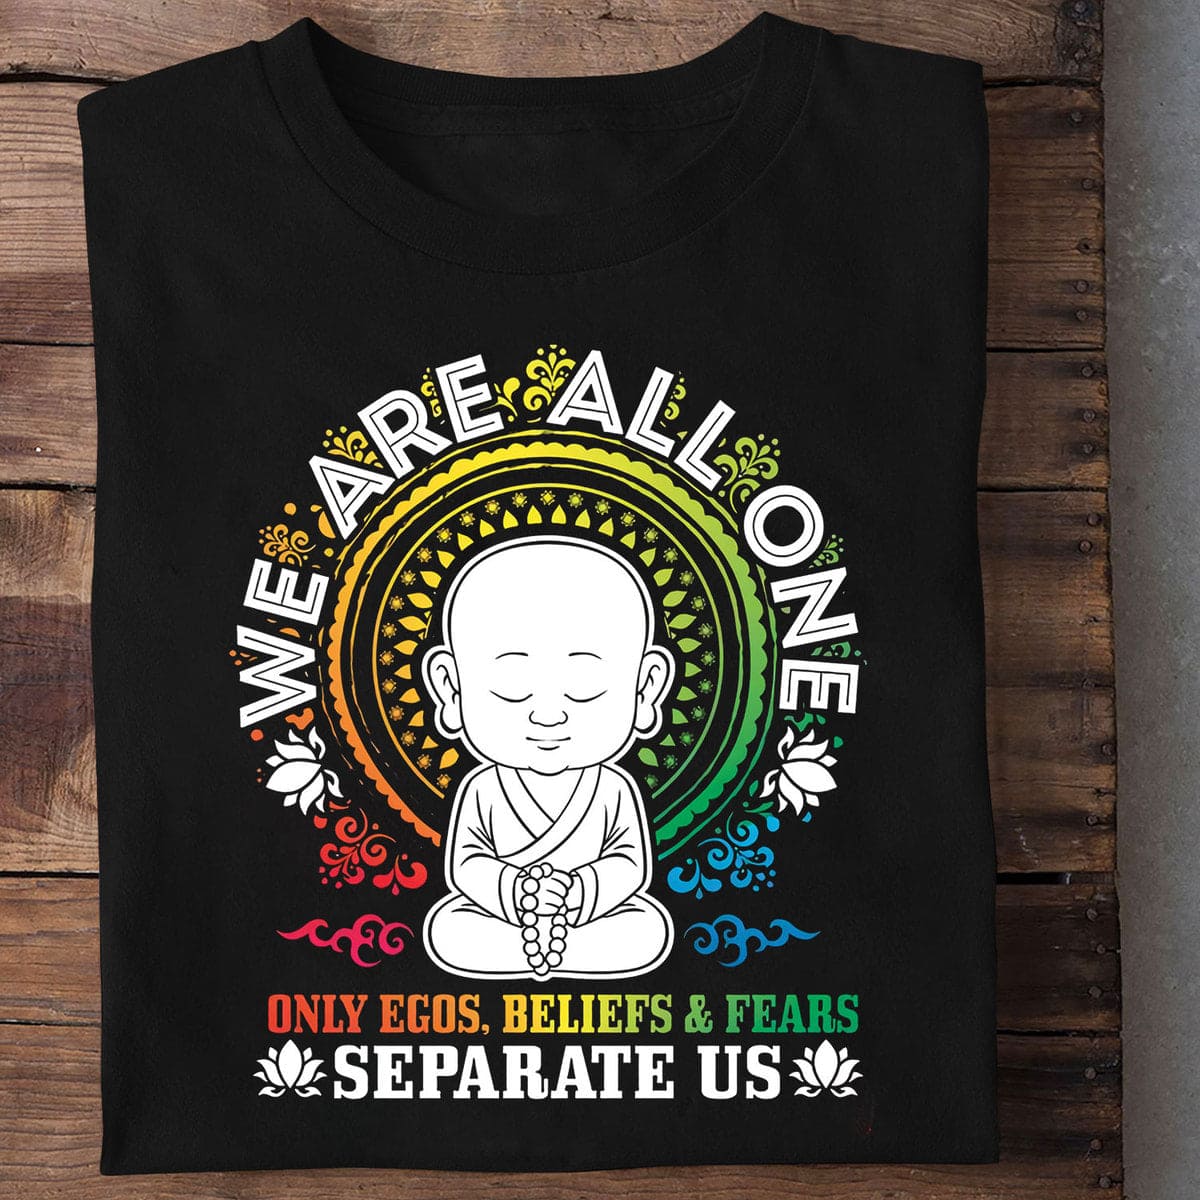 We are all one - Only egos, beliefs and fears separate us - Budhism follower T-shirt